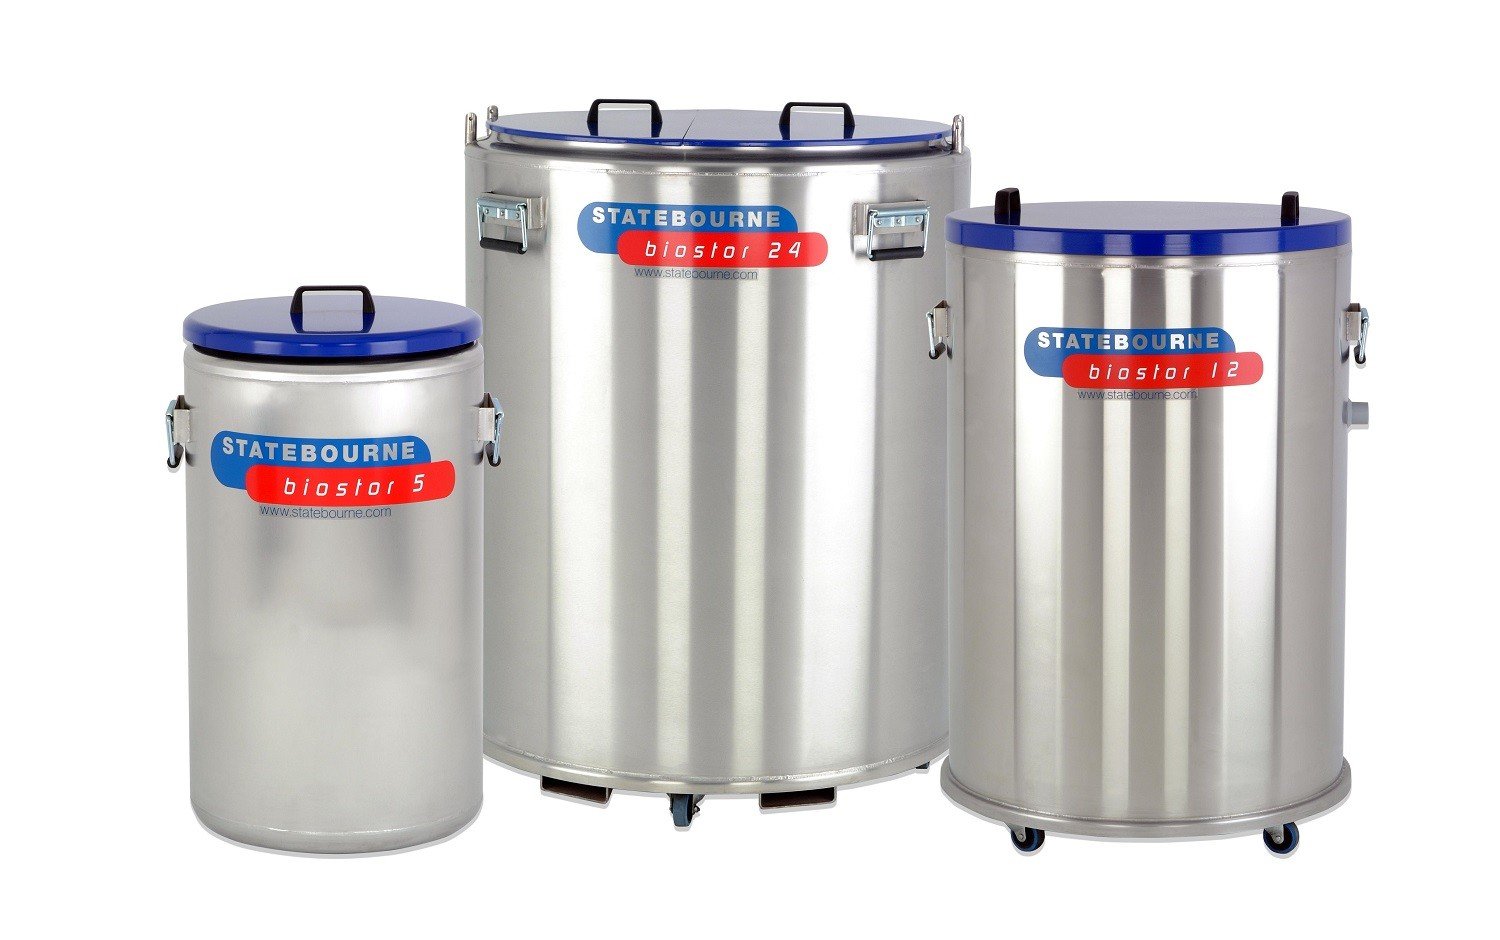 Statebourne Cryogenics 9915120 Biostor 5 Wide Neck Refrigerator , 66 Litres for Liquid or Vapour Phase Storage,  supplied with built in liquid nitrogen fill and level sensor tubes